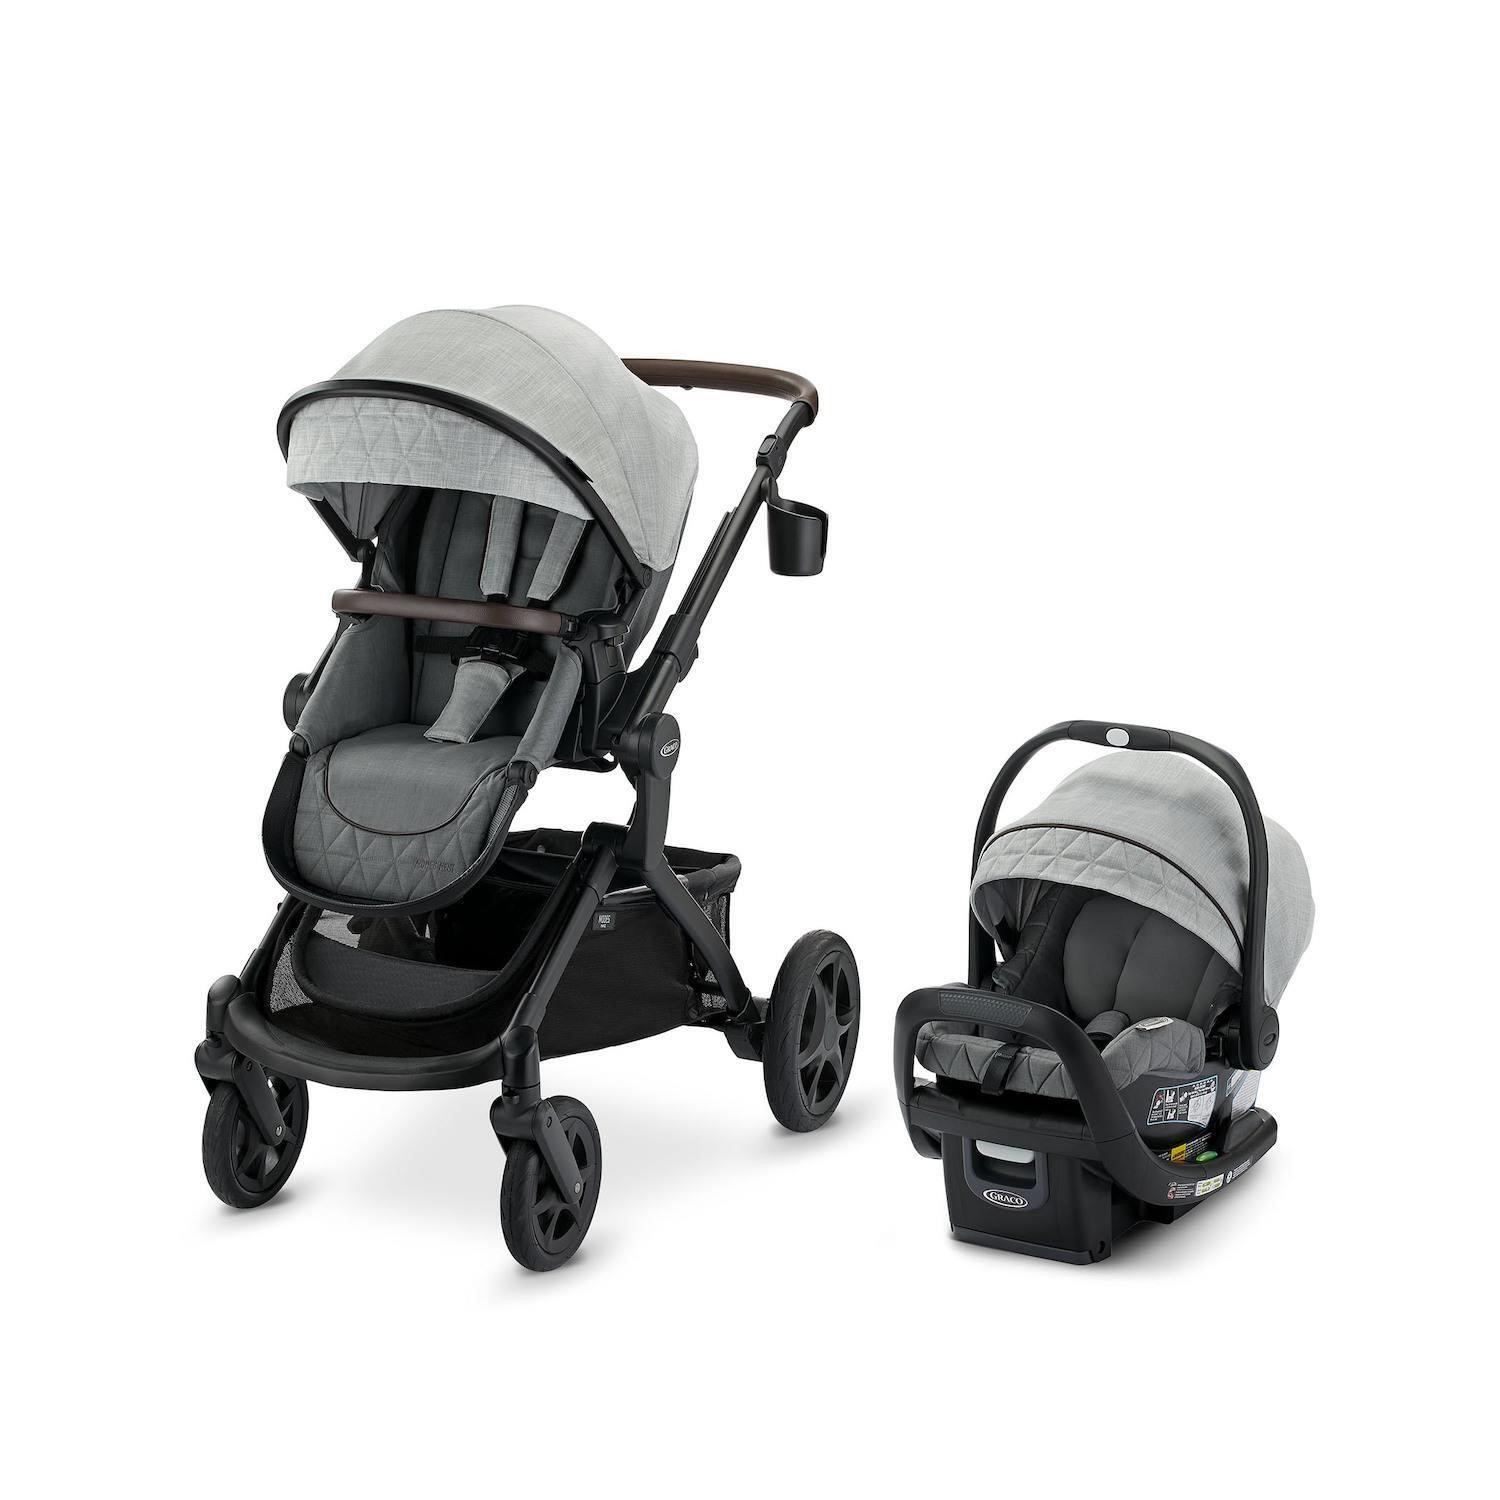 Graco Premier Modes Nest 3-in-1 Travel System